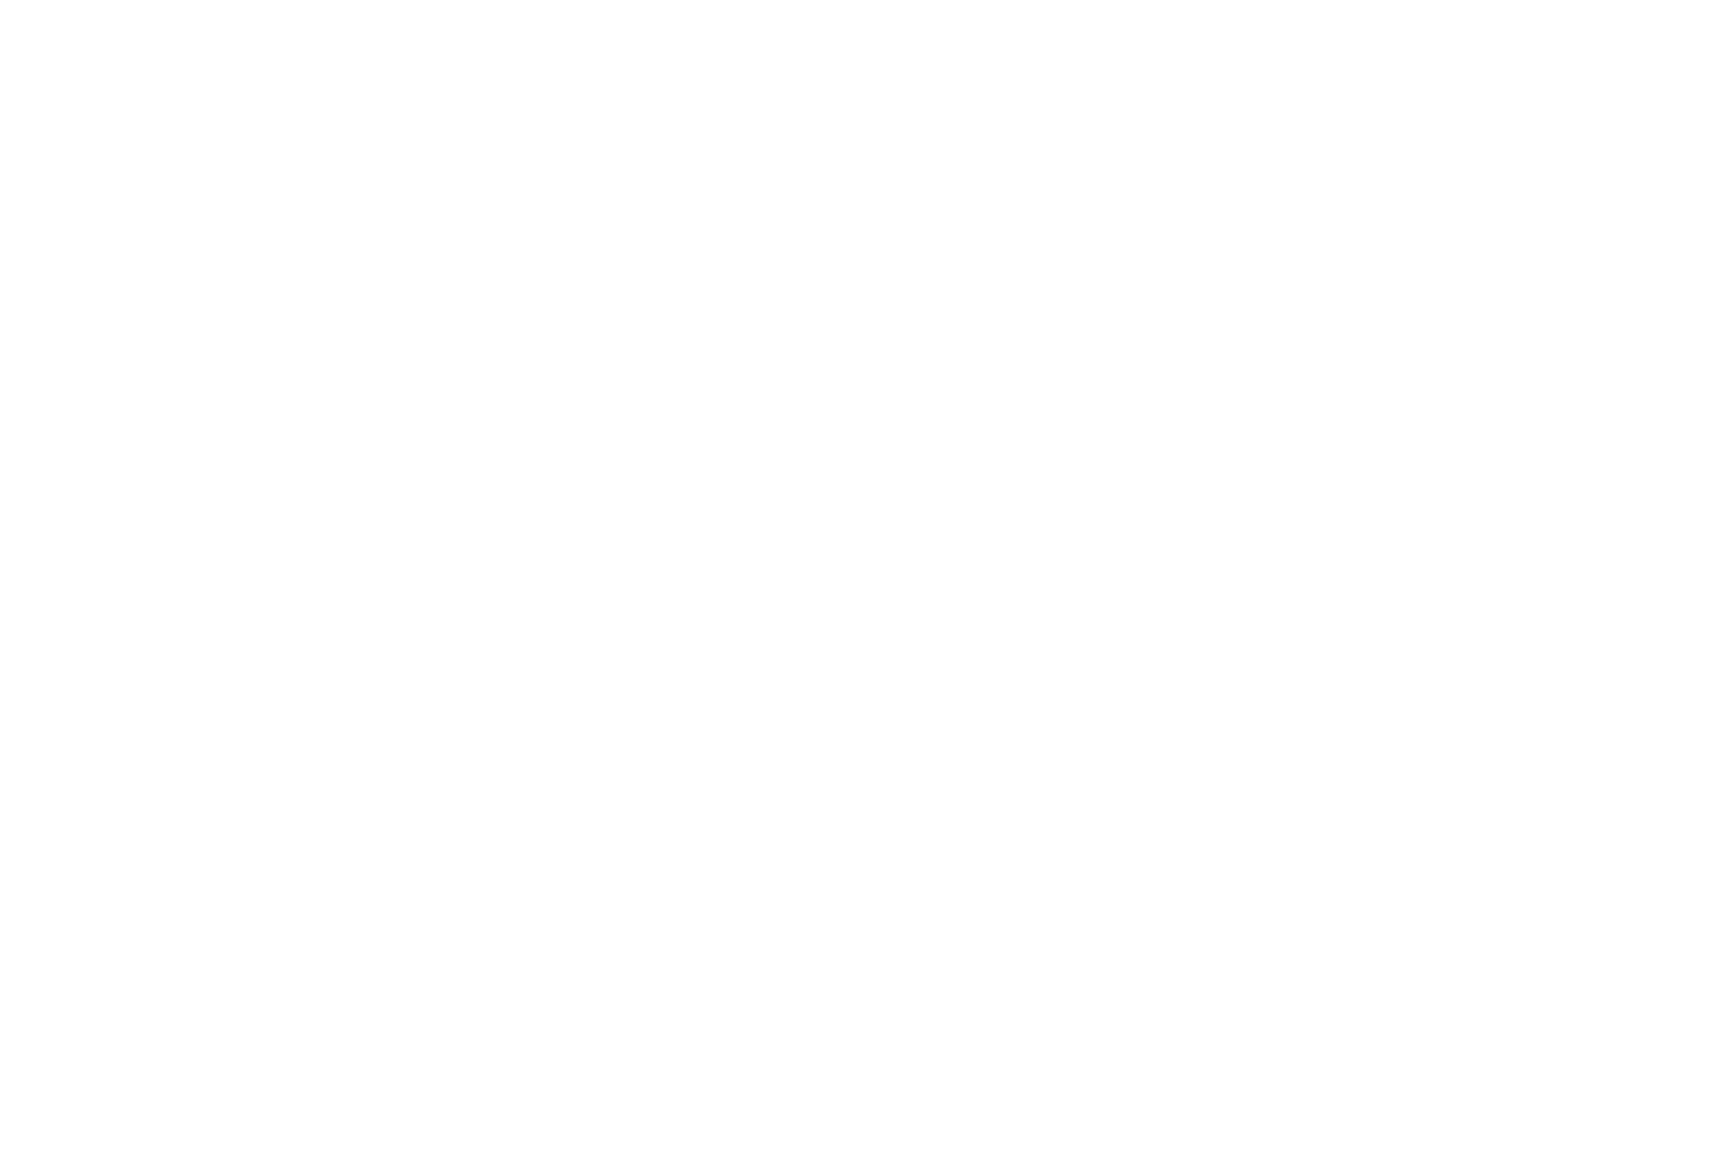 NOMINEE The Nickis 2023 1